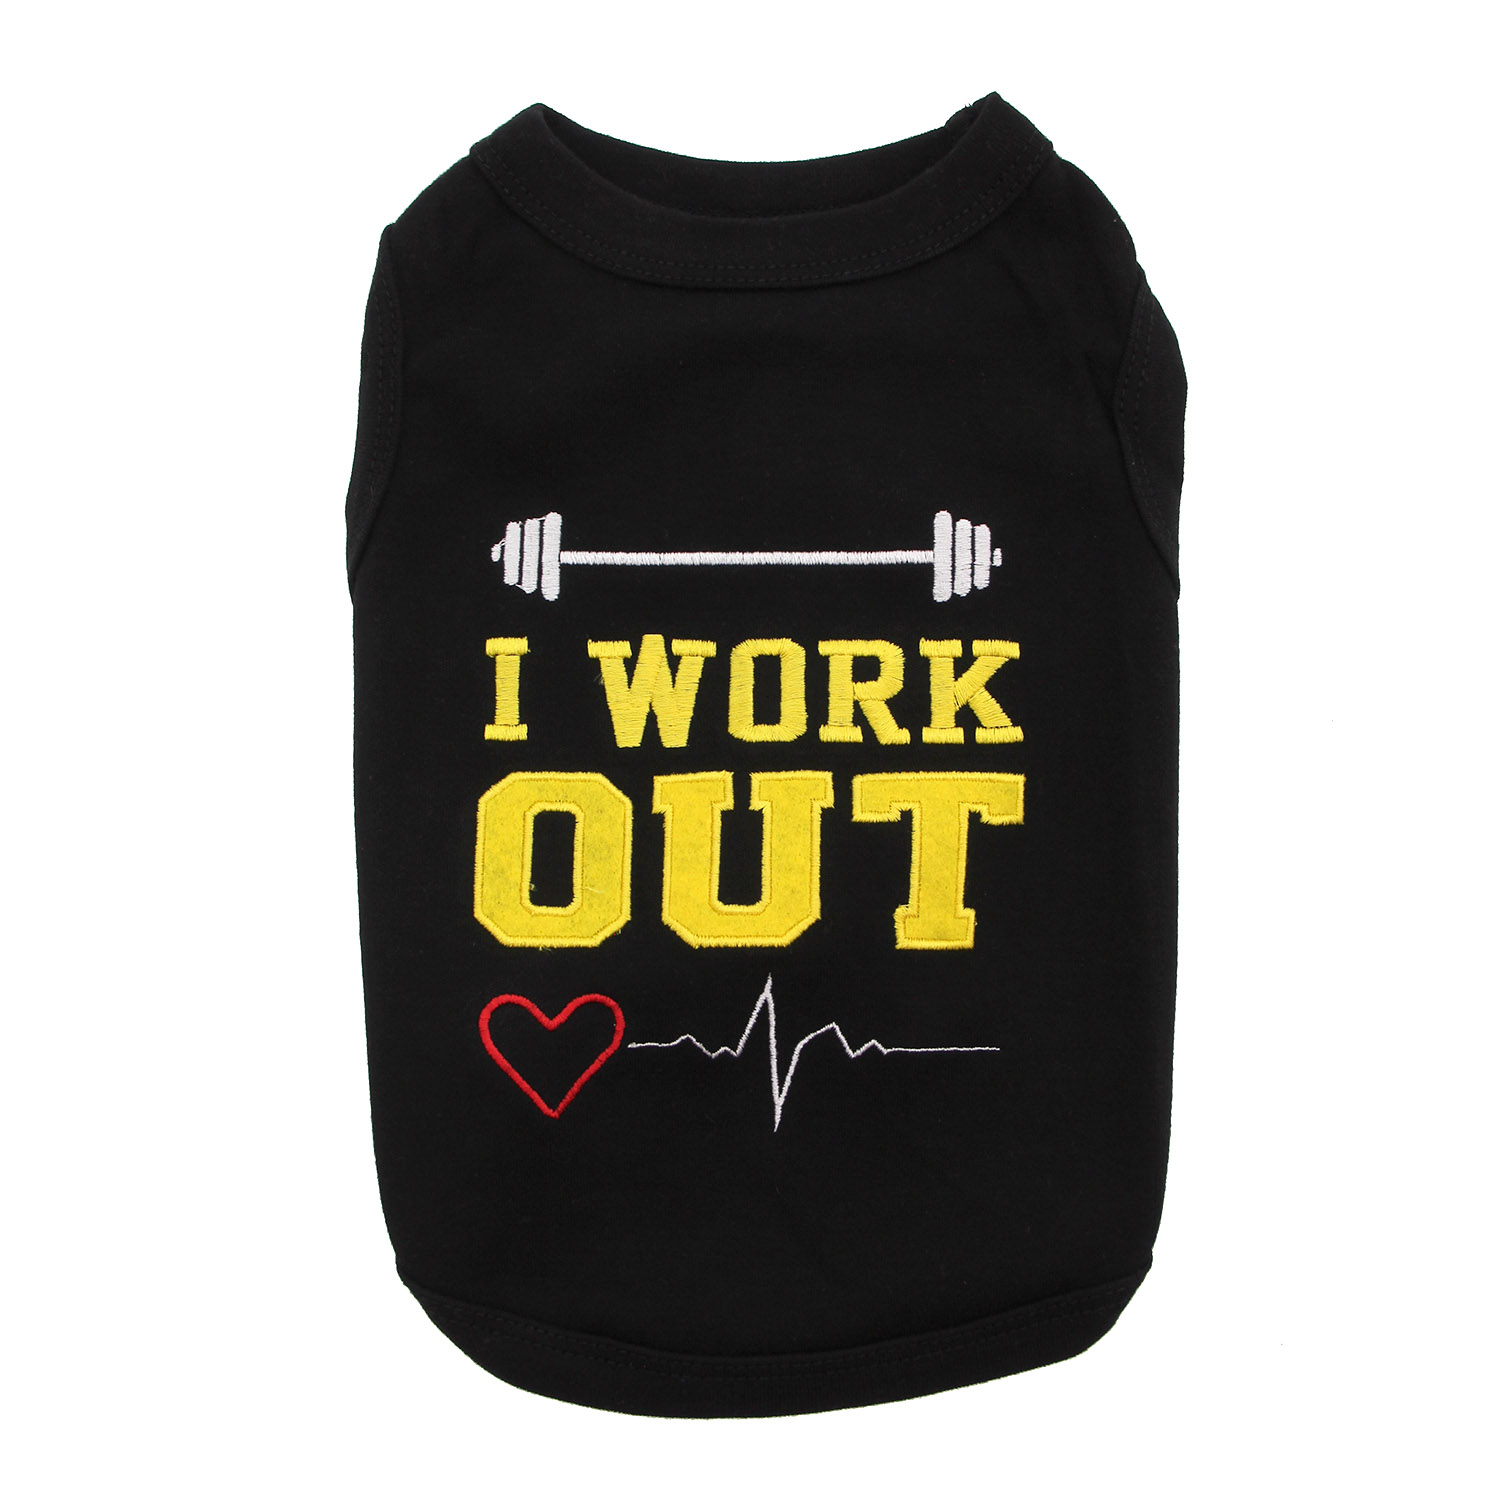 I Work Out Dog Tank by Parisian Pet - Black